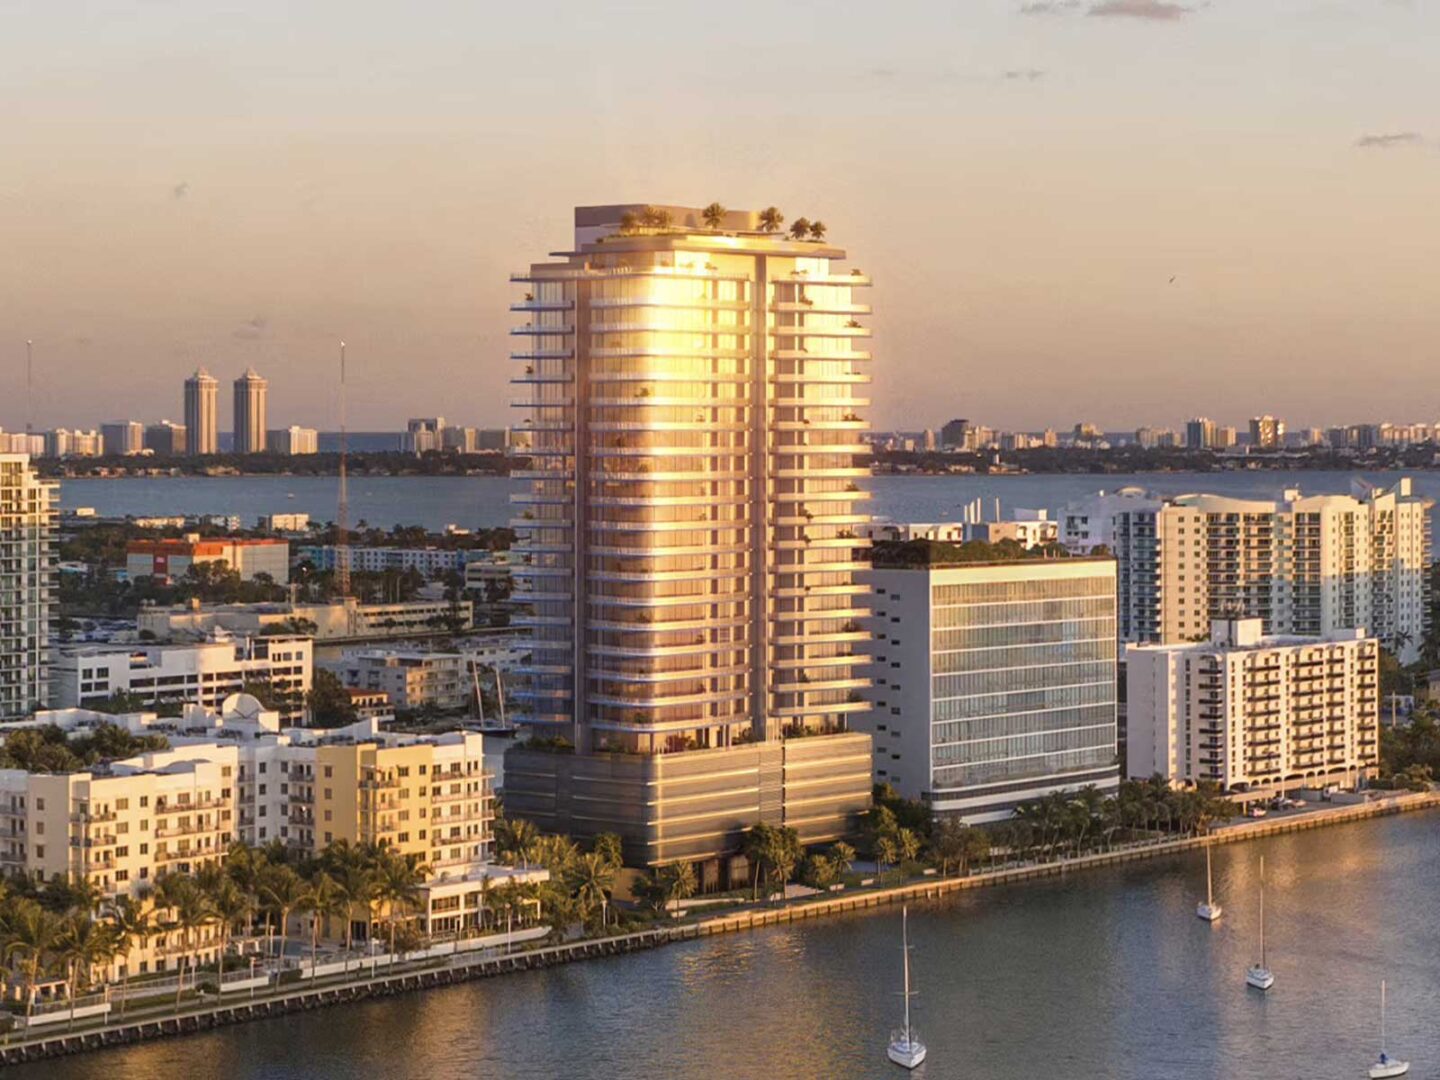 Pagani launches its first luxury residential project in Miami